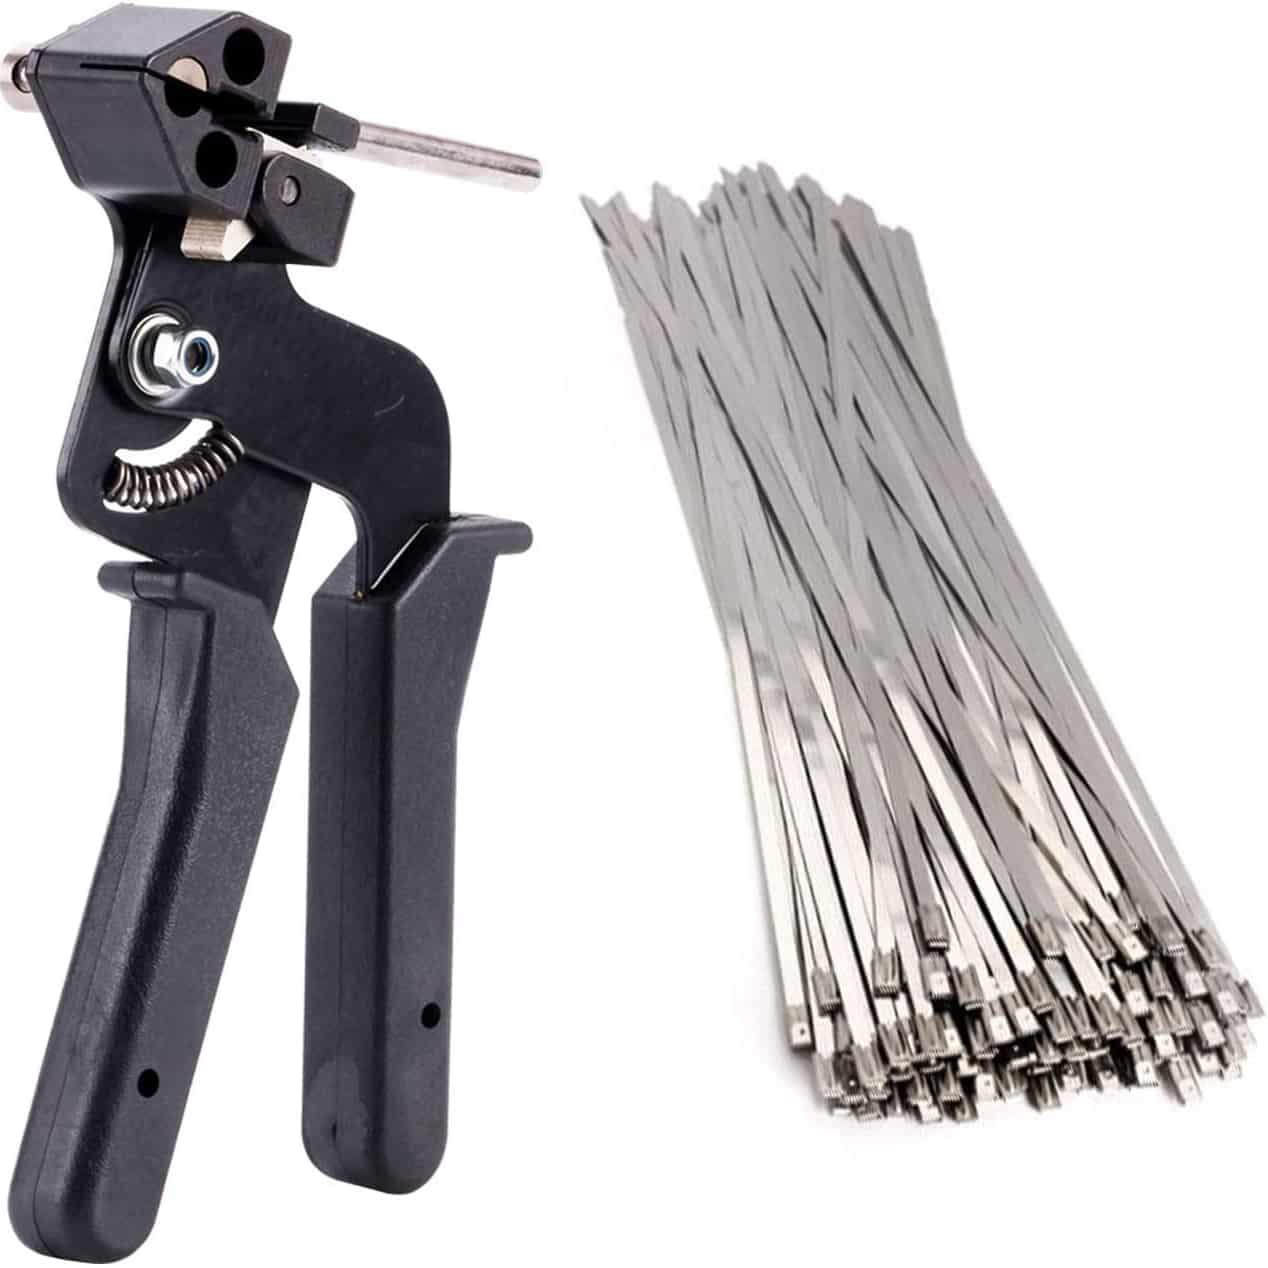 Top 10 Best Cable Tie Guns in 2021 Reviews | Buying Guide